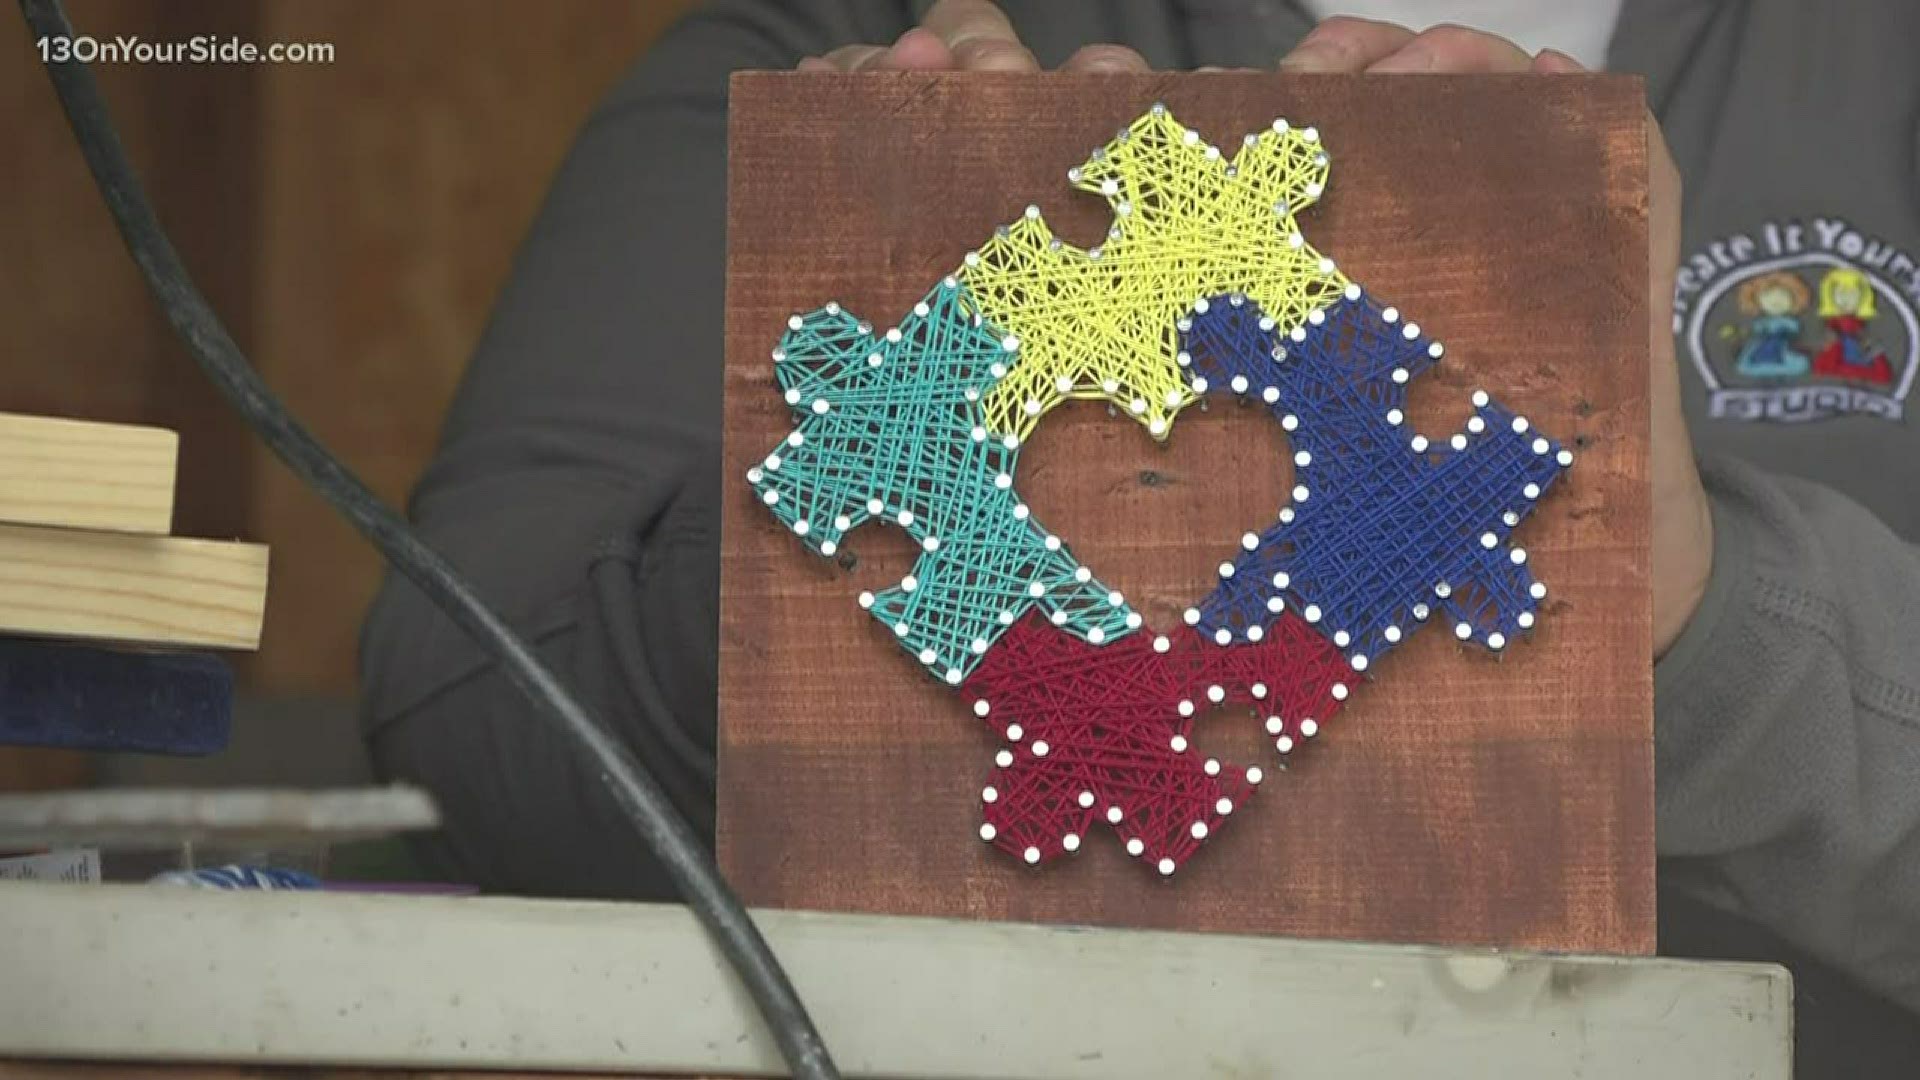 One Ottawa County artist decided to give back to an organization that supports people and families that deal with autism